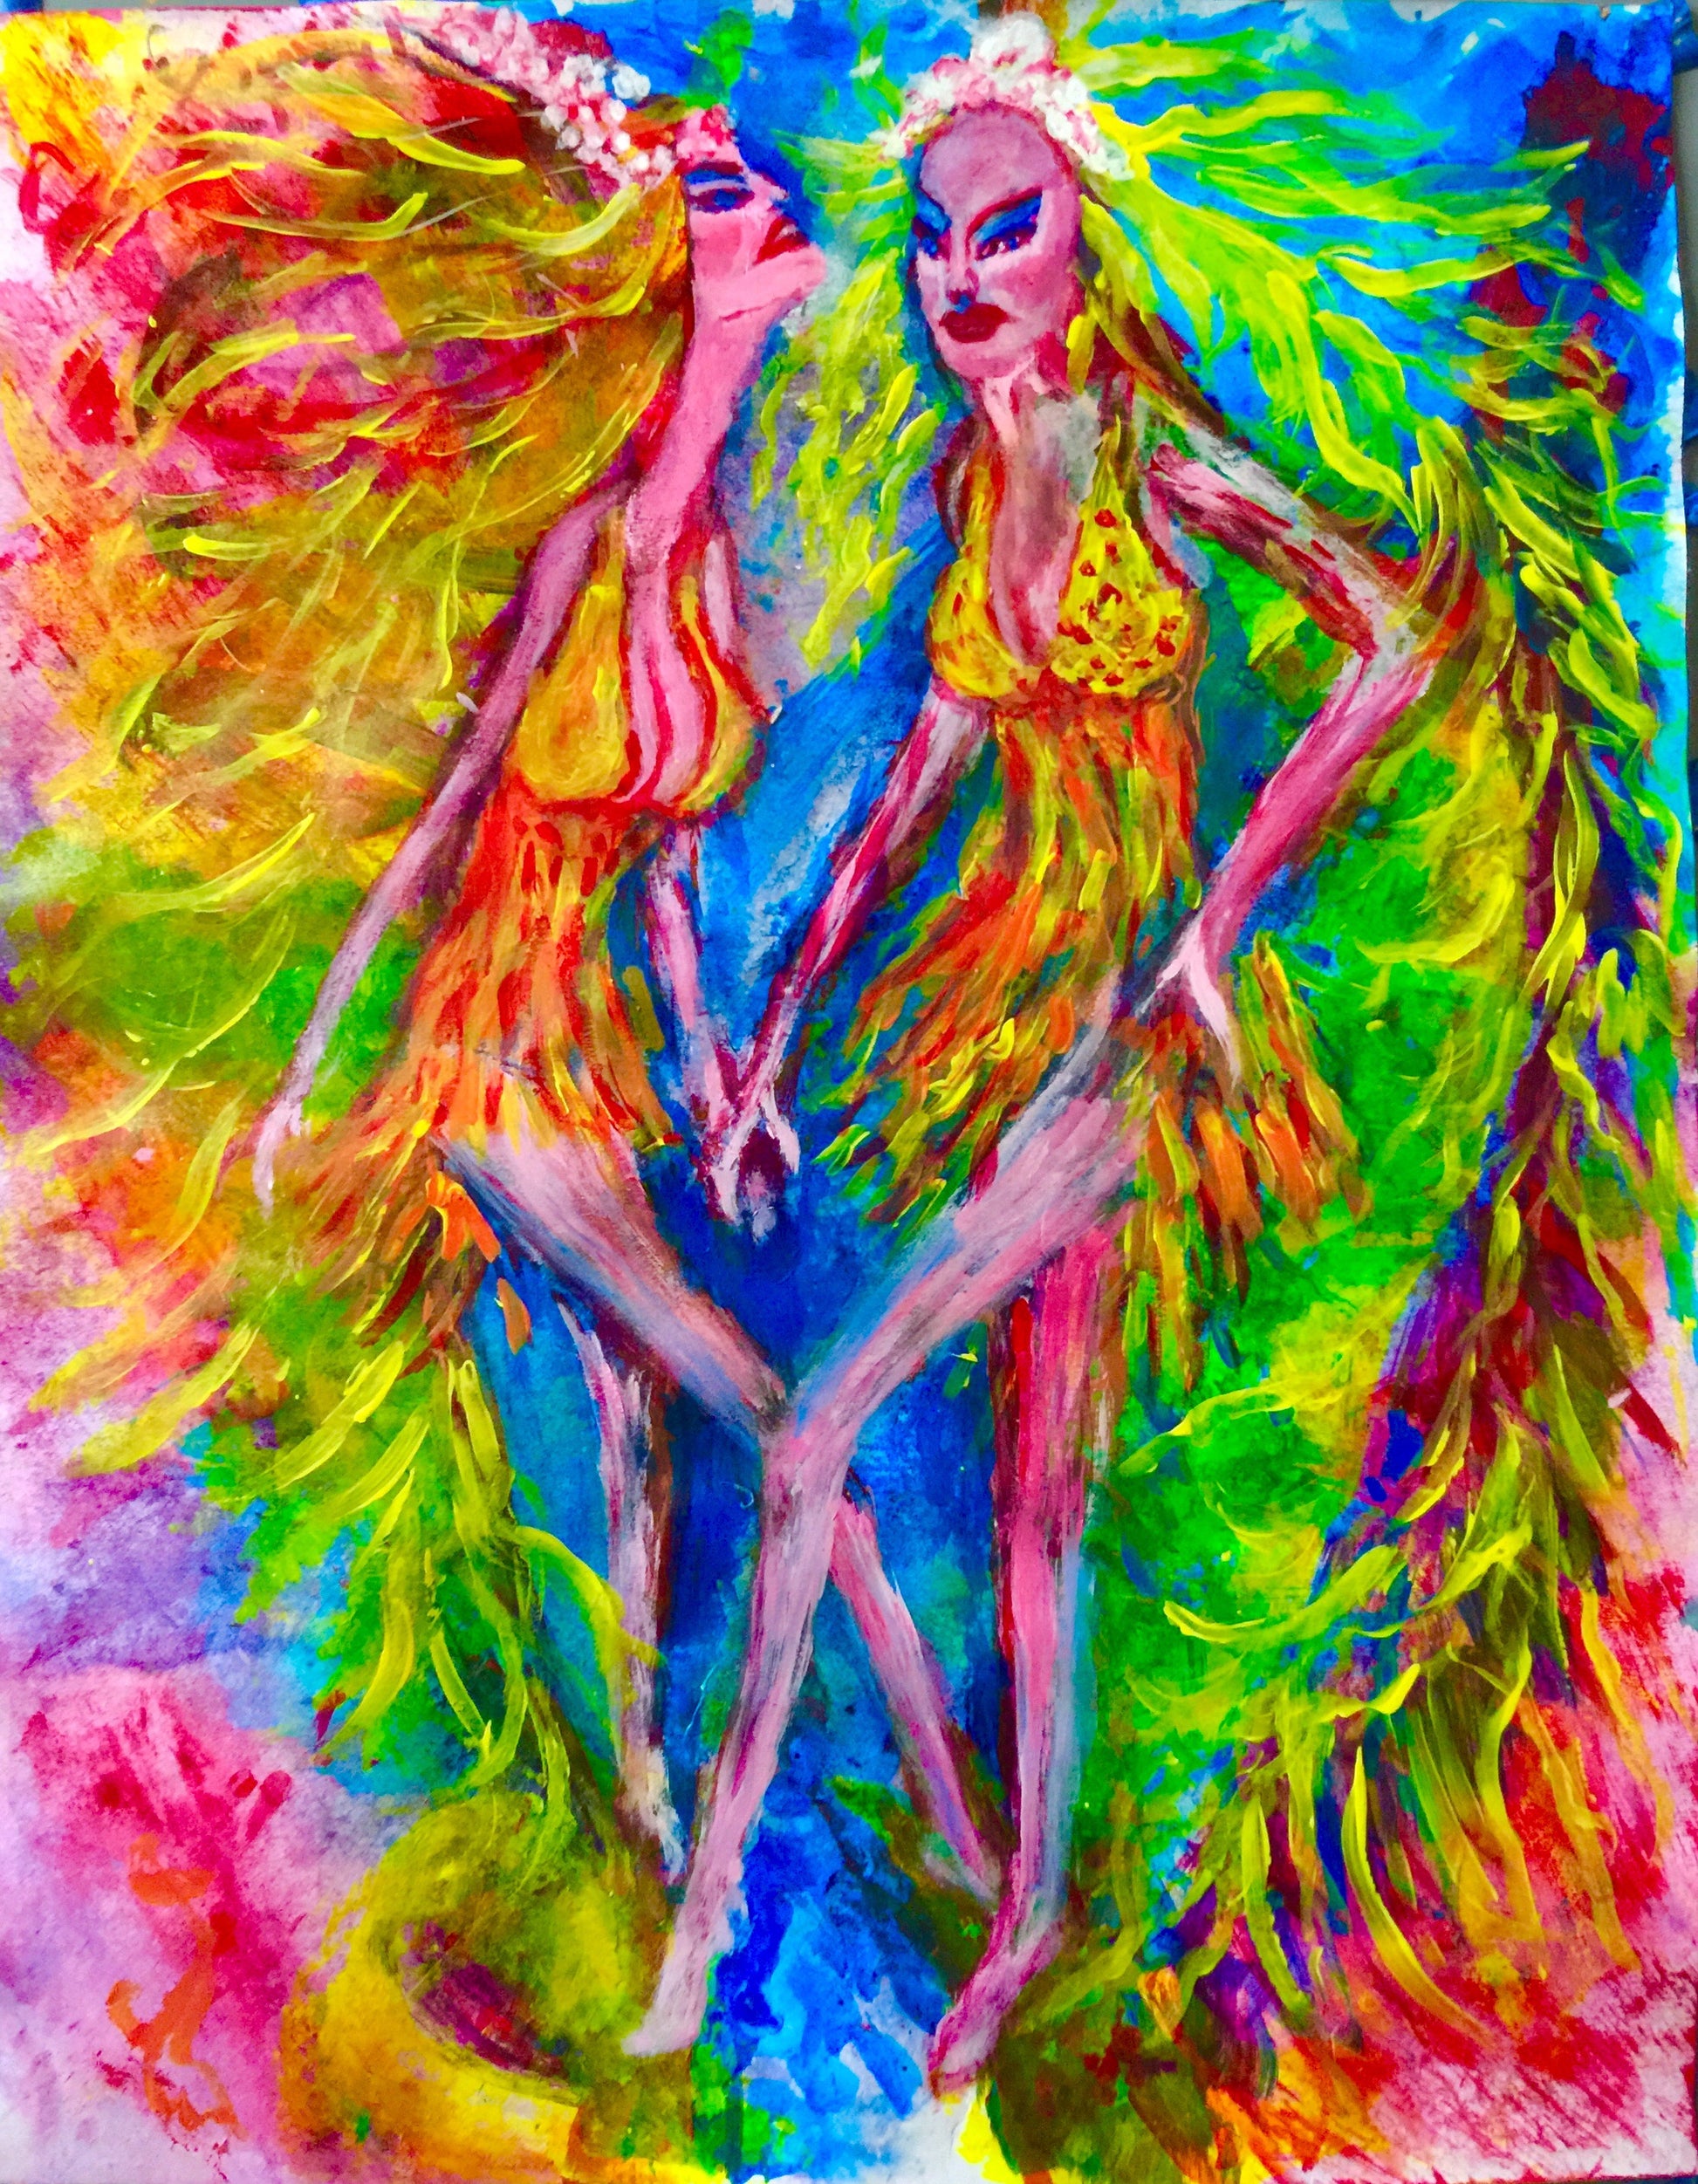 It’s Vegas Baby, its Vegas ! - Sonarta.com To all the Amazing and beautiful Angeles in Las Vegas ❤️  Keep Dancing😘😘 This painting is an Acrylic on Paper by Shahla Rahimi  Reynolds. It's Vegas Baby, It's Vegas ! is 27” H X 21” W.